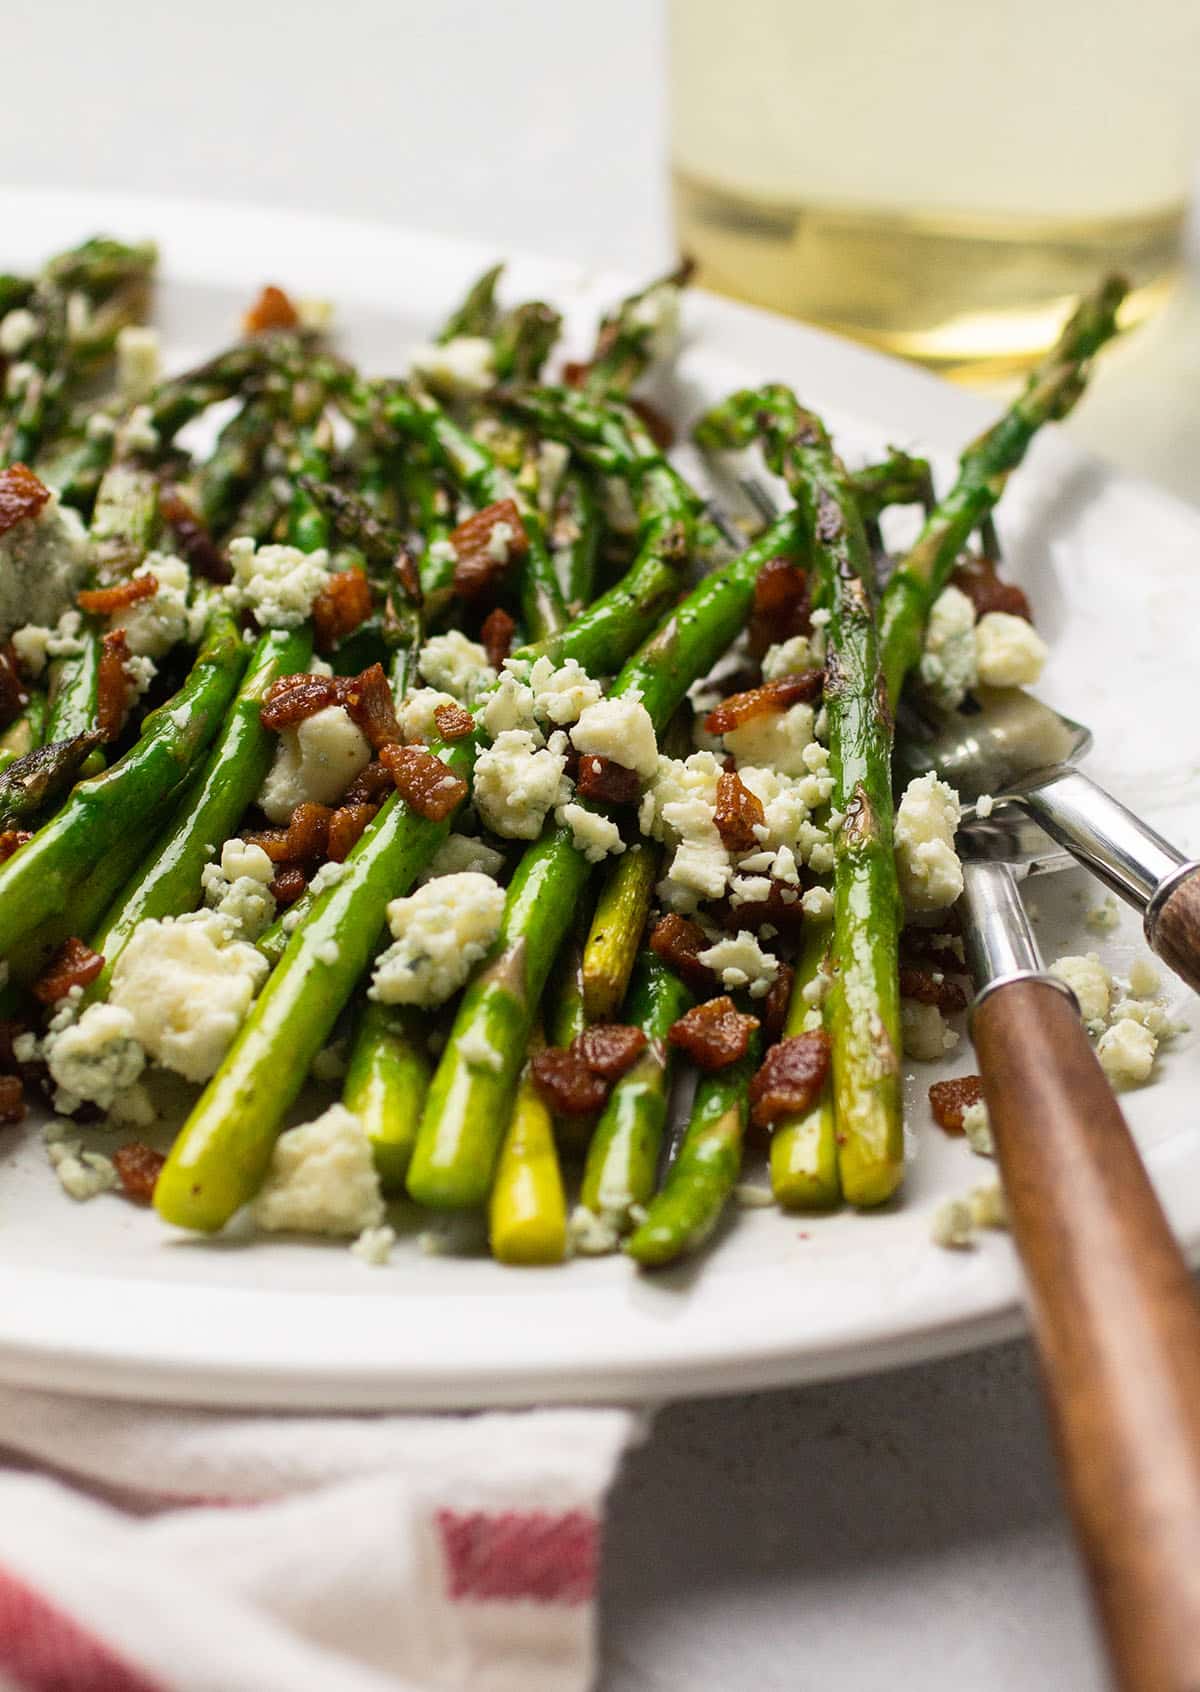 Two wooden forks on a white plate with asparagus, bacon, and blue cheese.